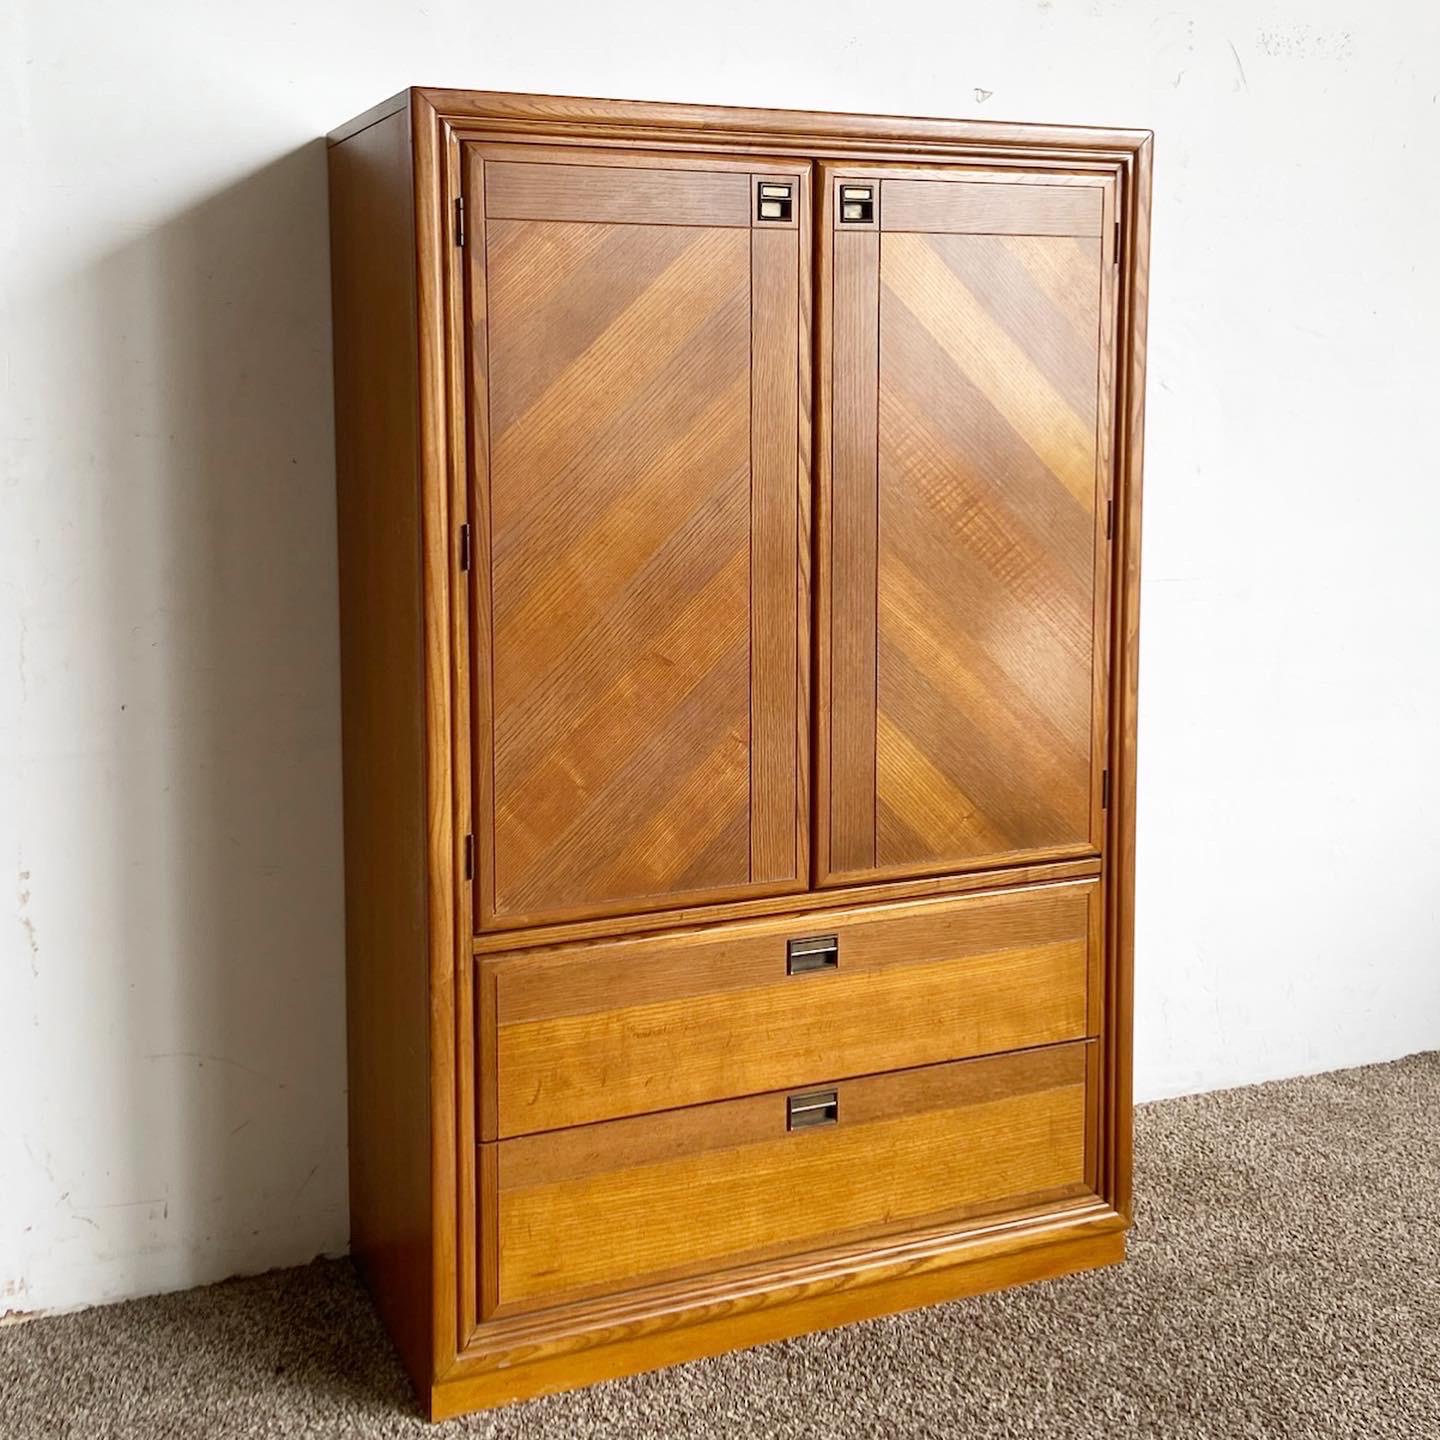 Introducing the Mid Century Modern Wooden Armoire by Bernhardt. A perfect blend of style, storage, and mid-century charm for your bedroom.

Striking doors flaunting a veneer showcasing a beautiful stripe pattern.
Ample storage space for your